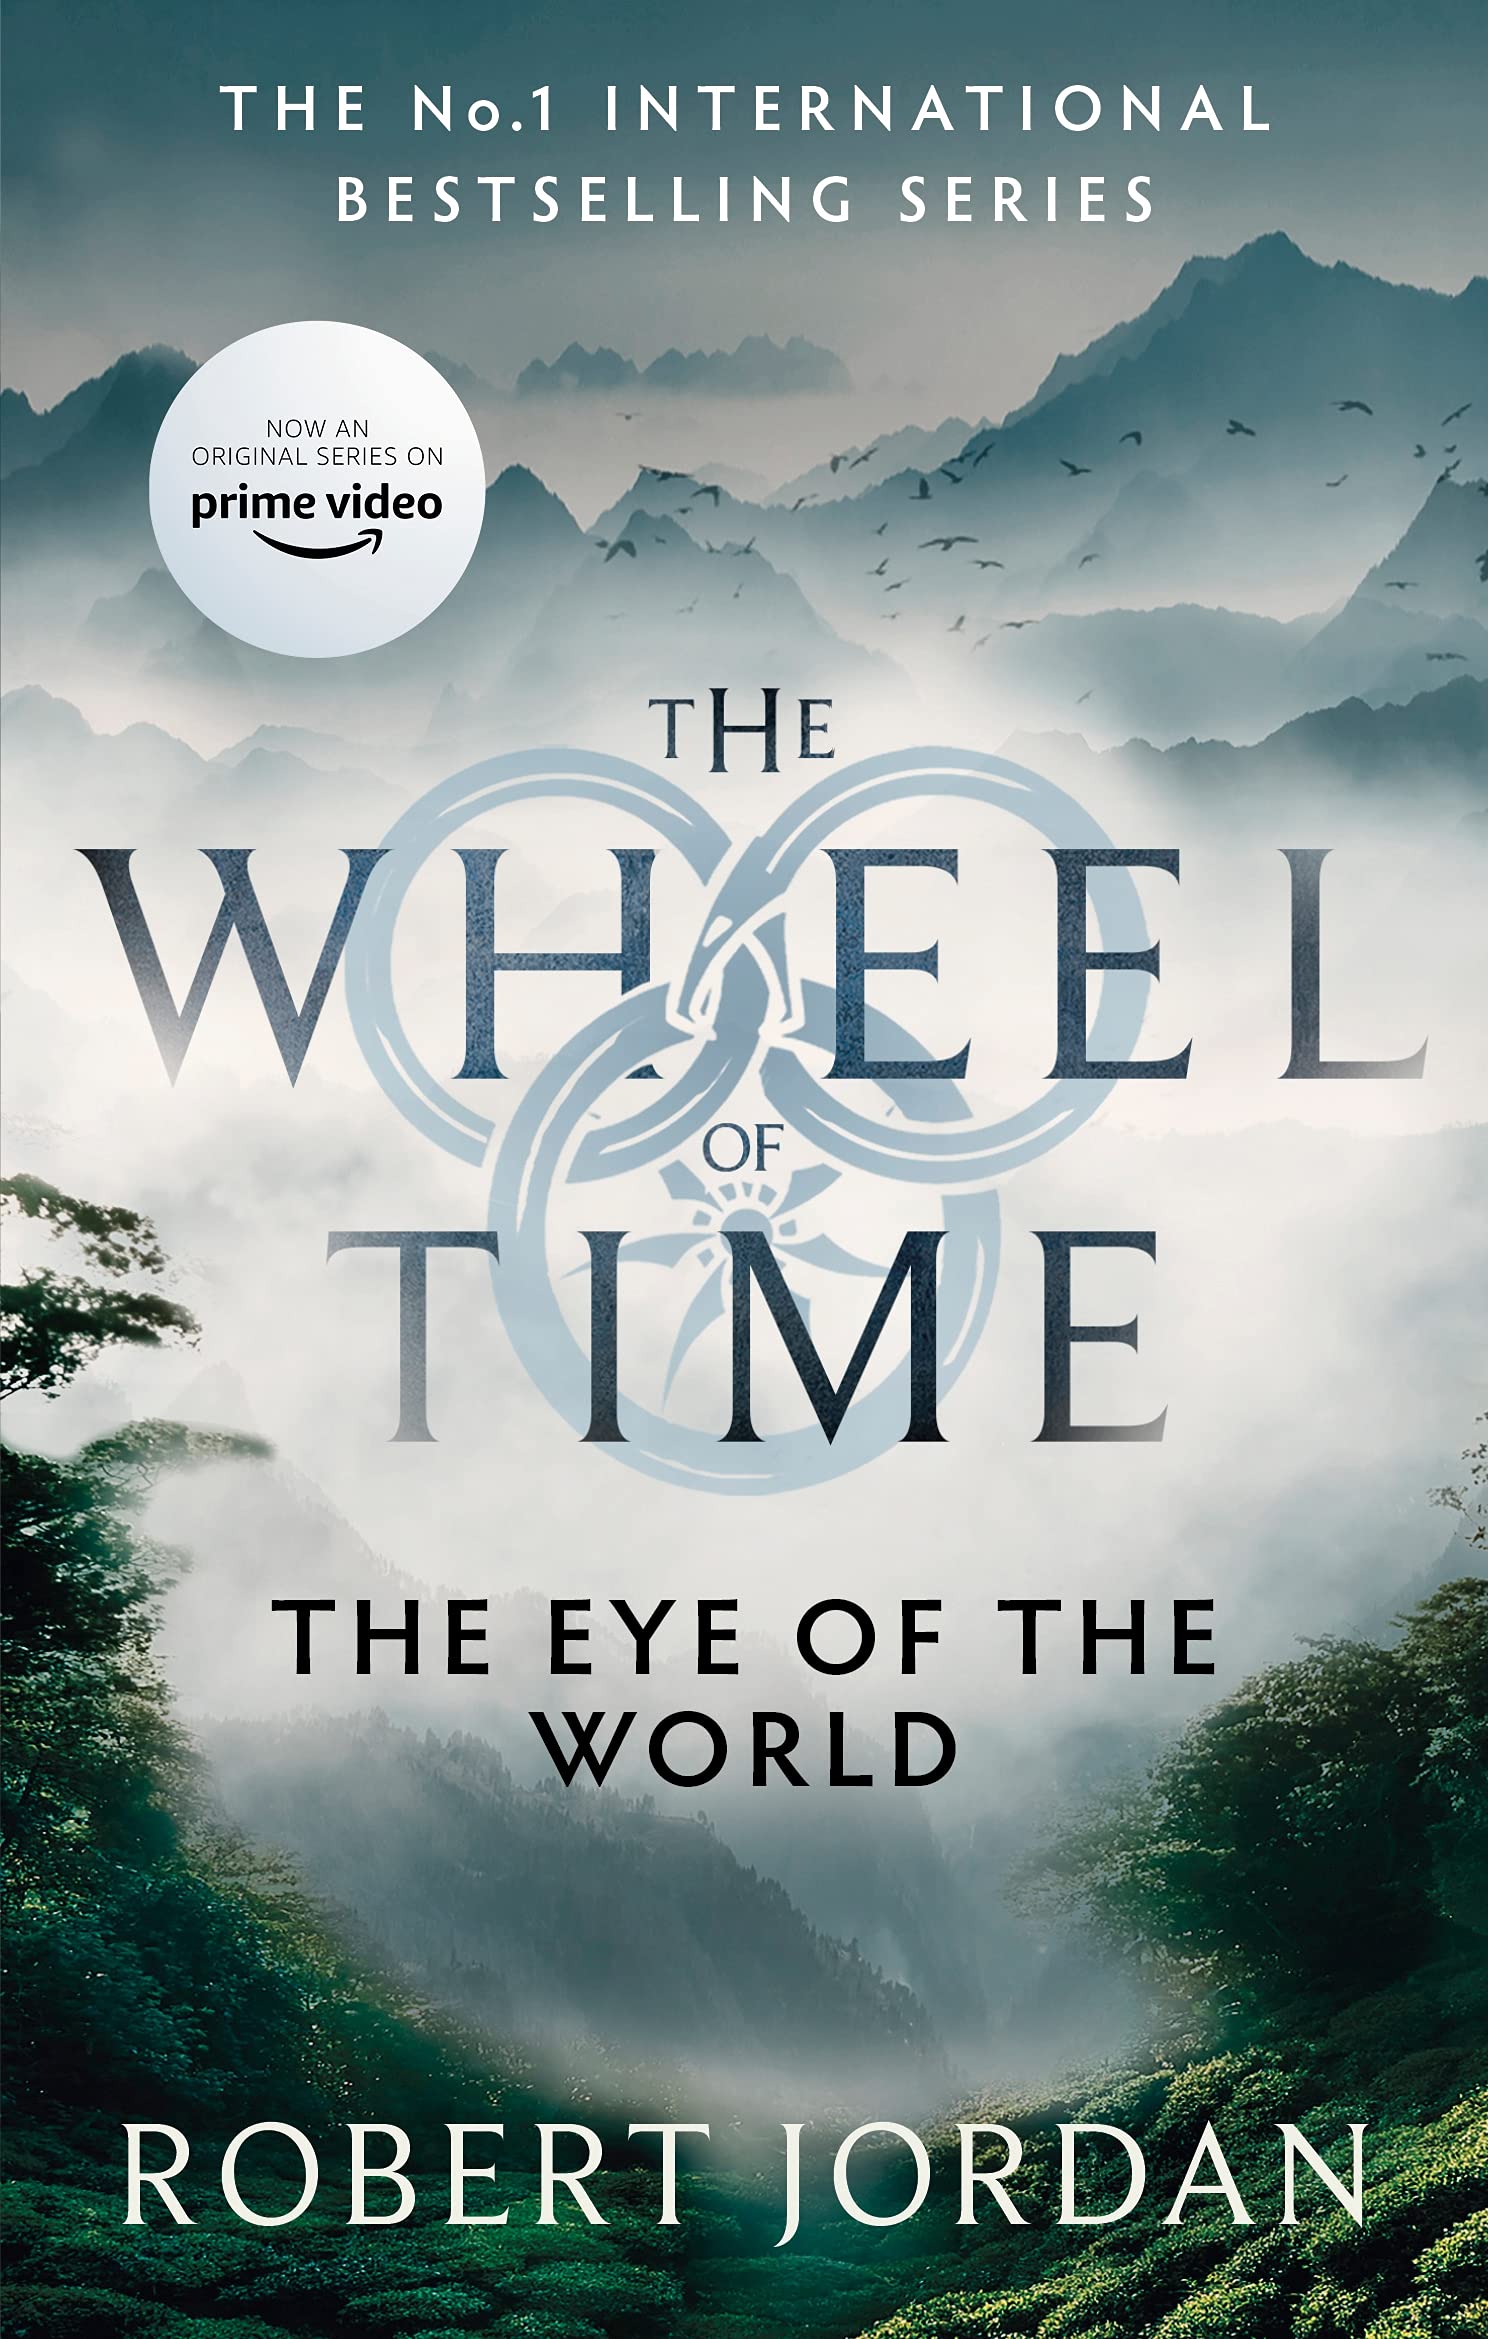 The Eye of the World - The Wheel of Time, Book 1